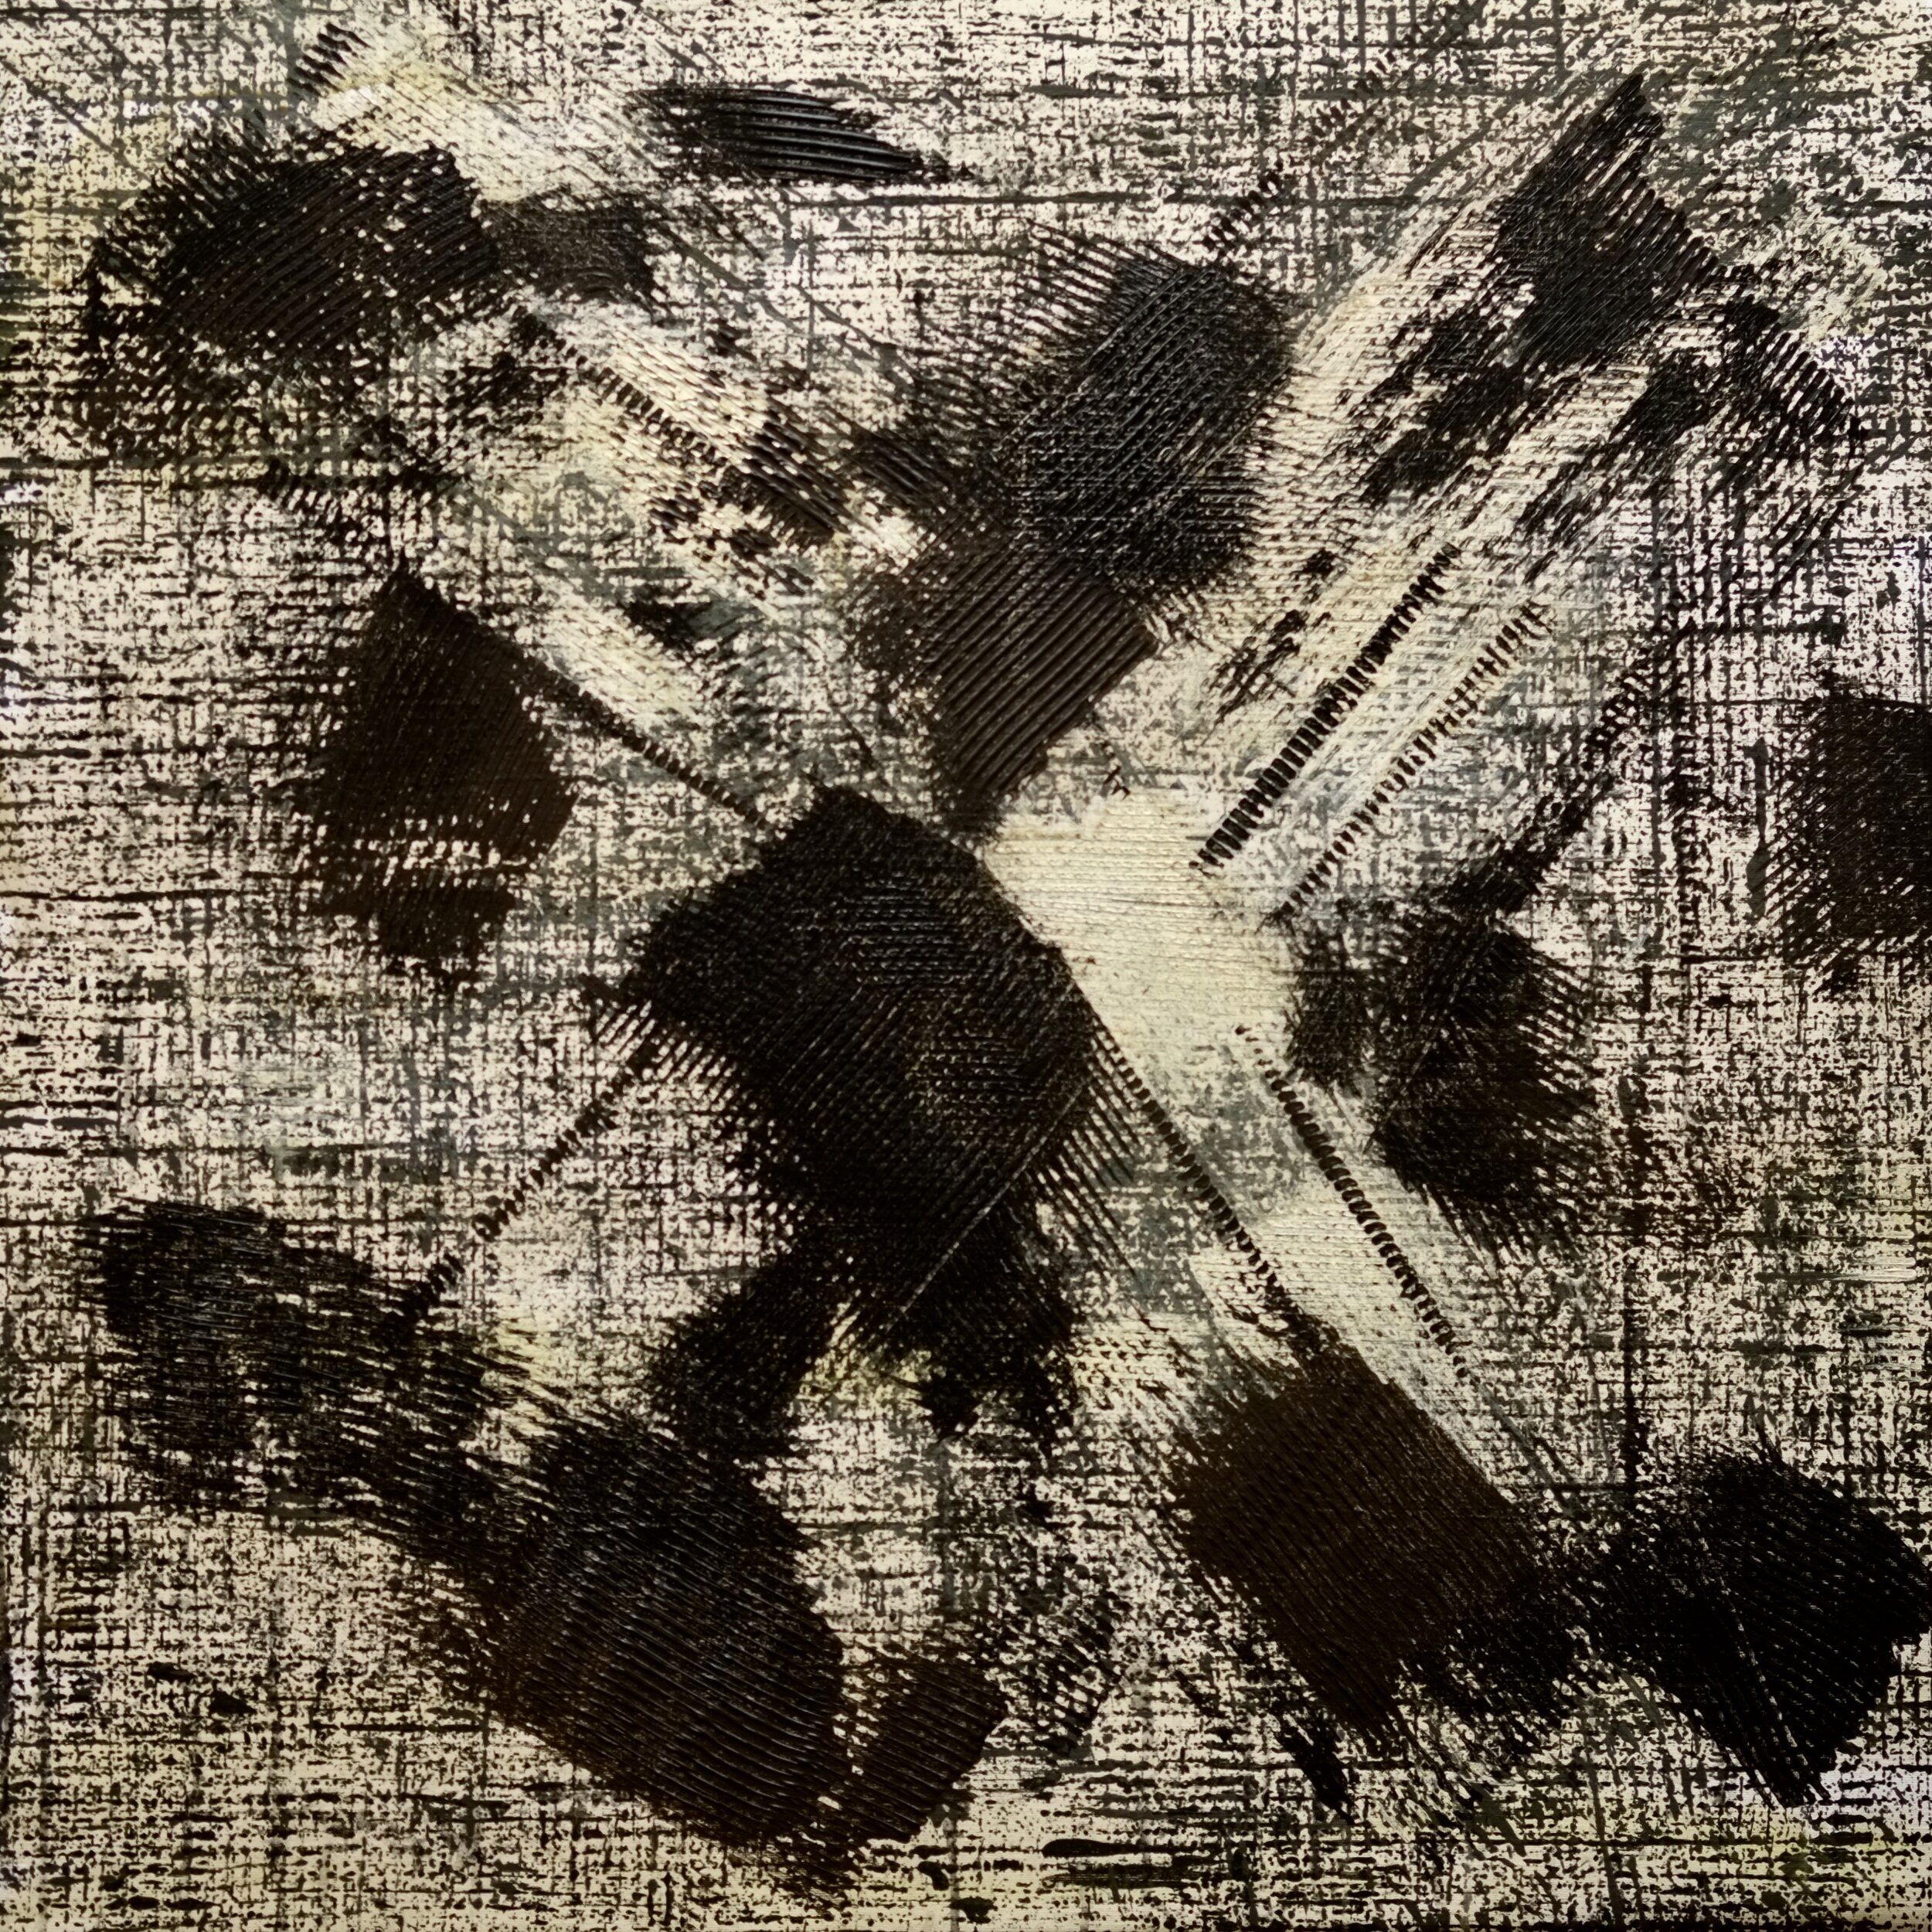  Untitled; mixed media on linen; 90x90; 2019 